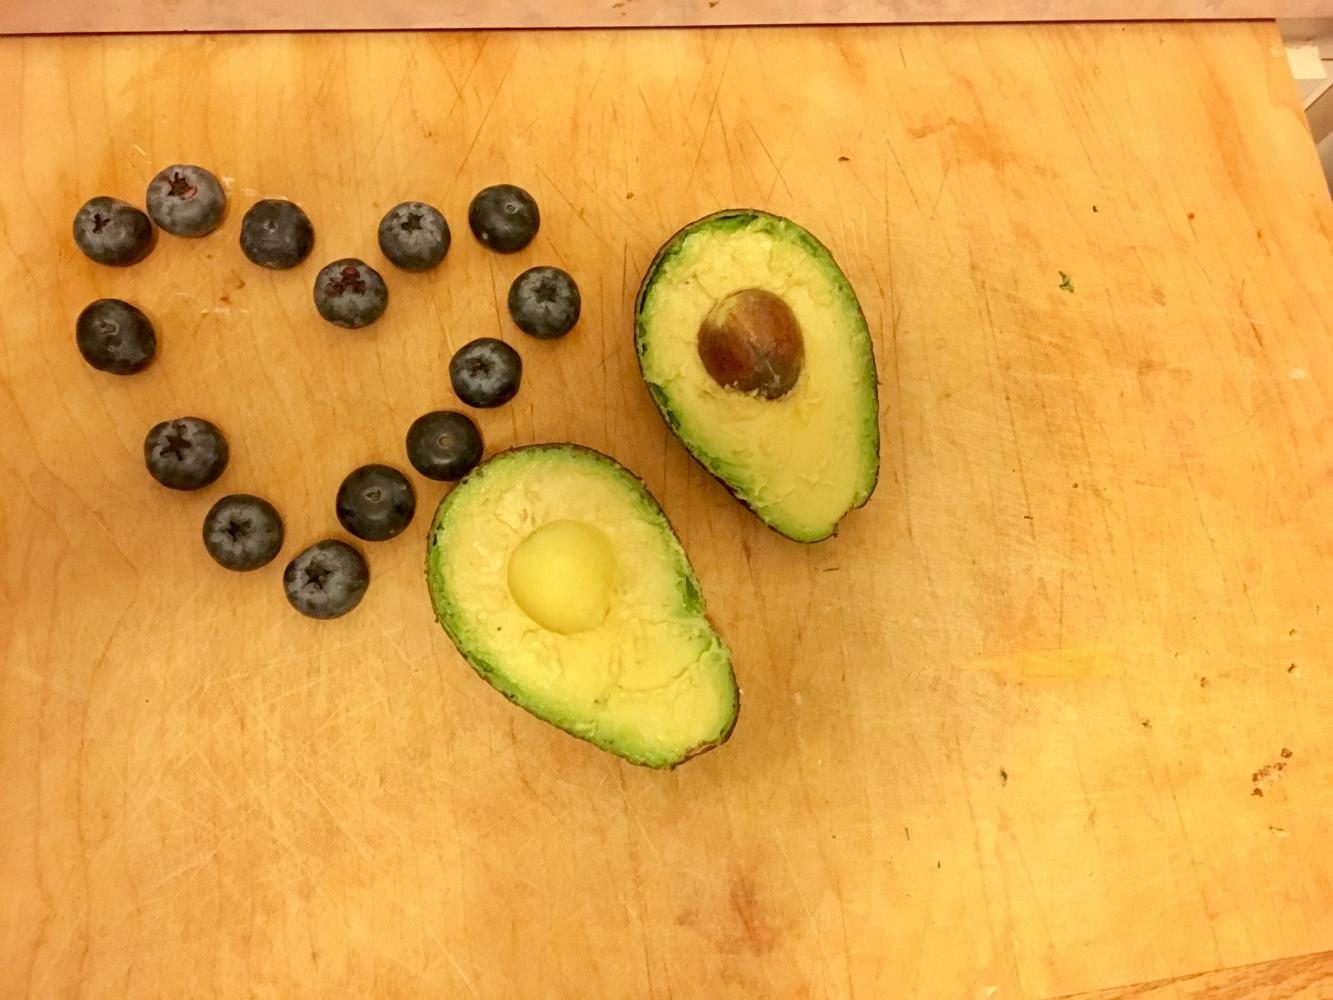 Avocados and blueberries provide nutritious fuel for both the body and the brain.  The vitamins in these fruits reduce inflammation in the brain caused by stress and otherwise improve cognitive function.